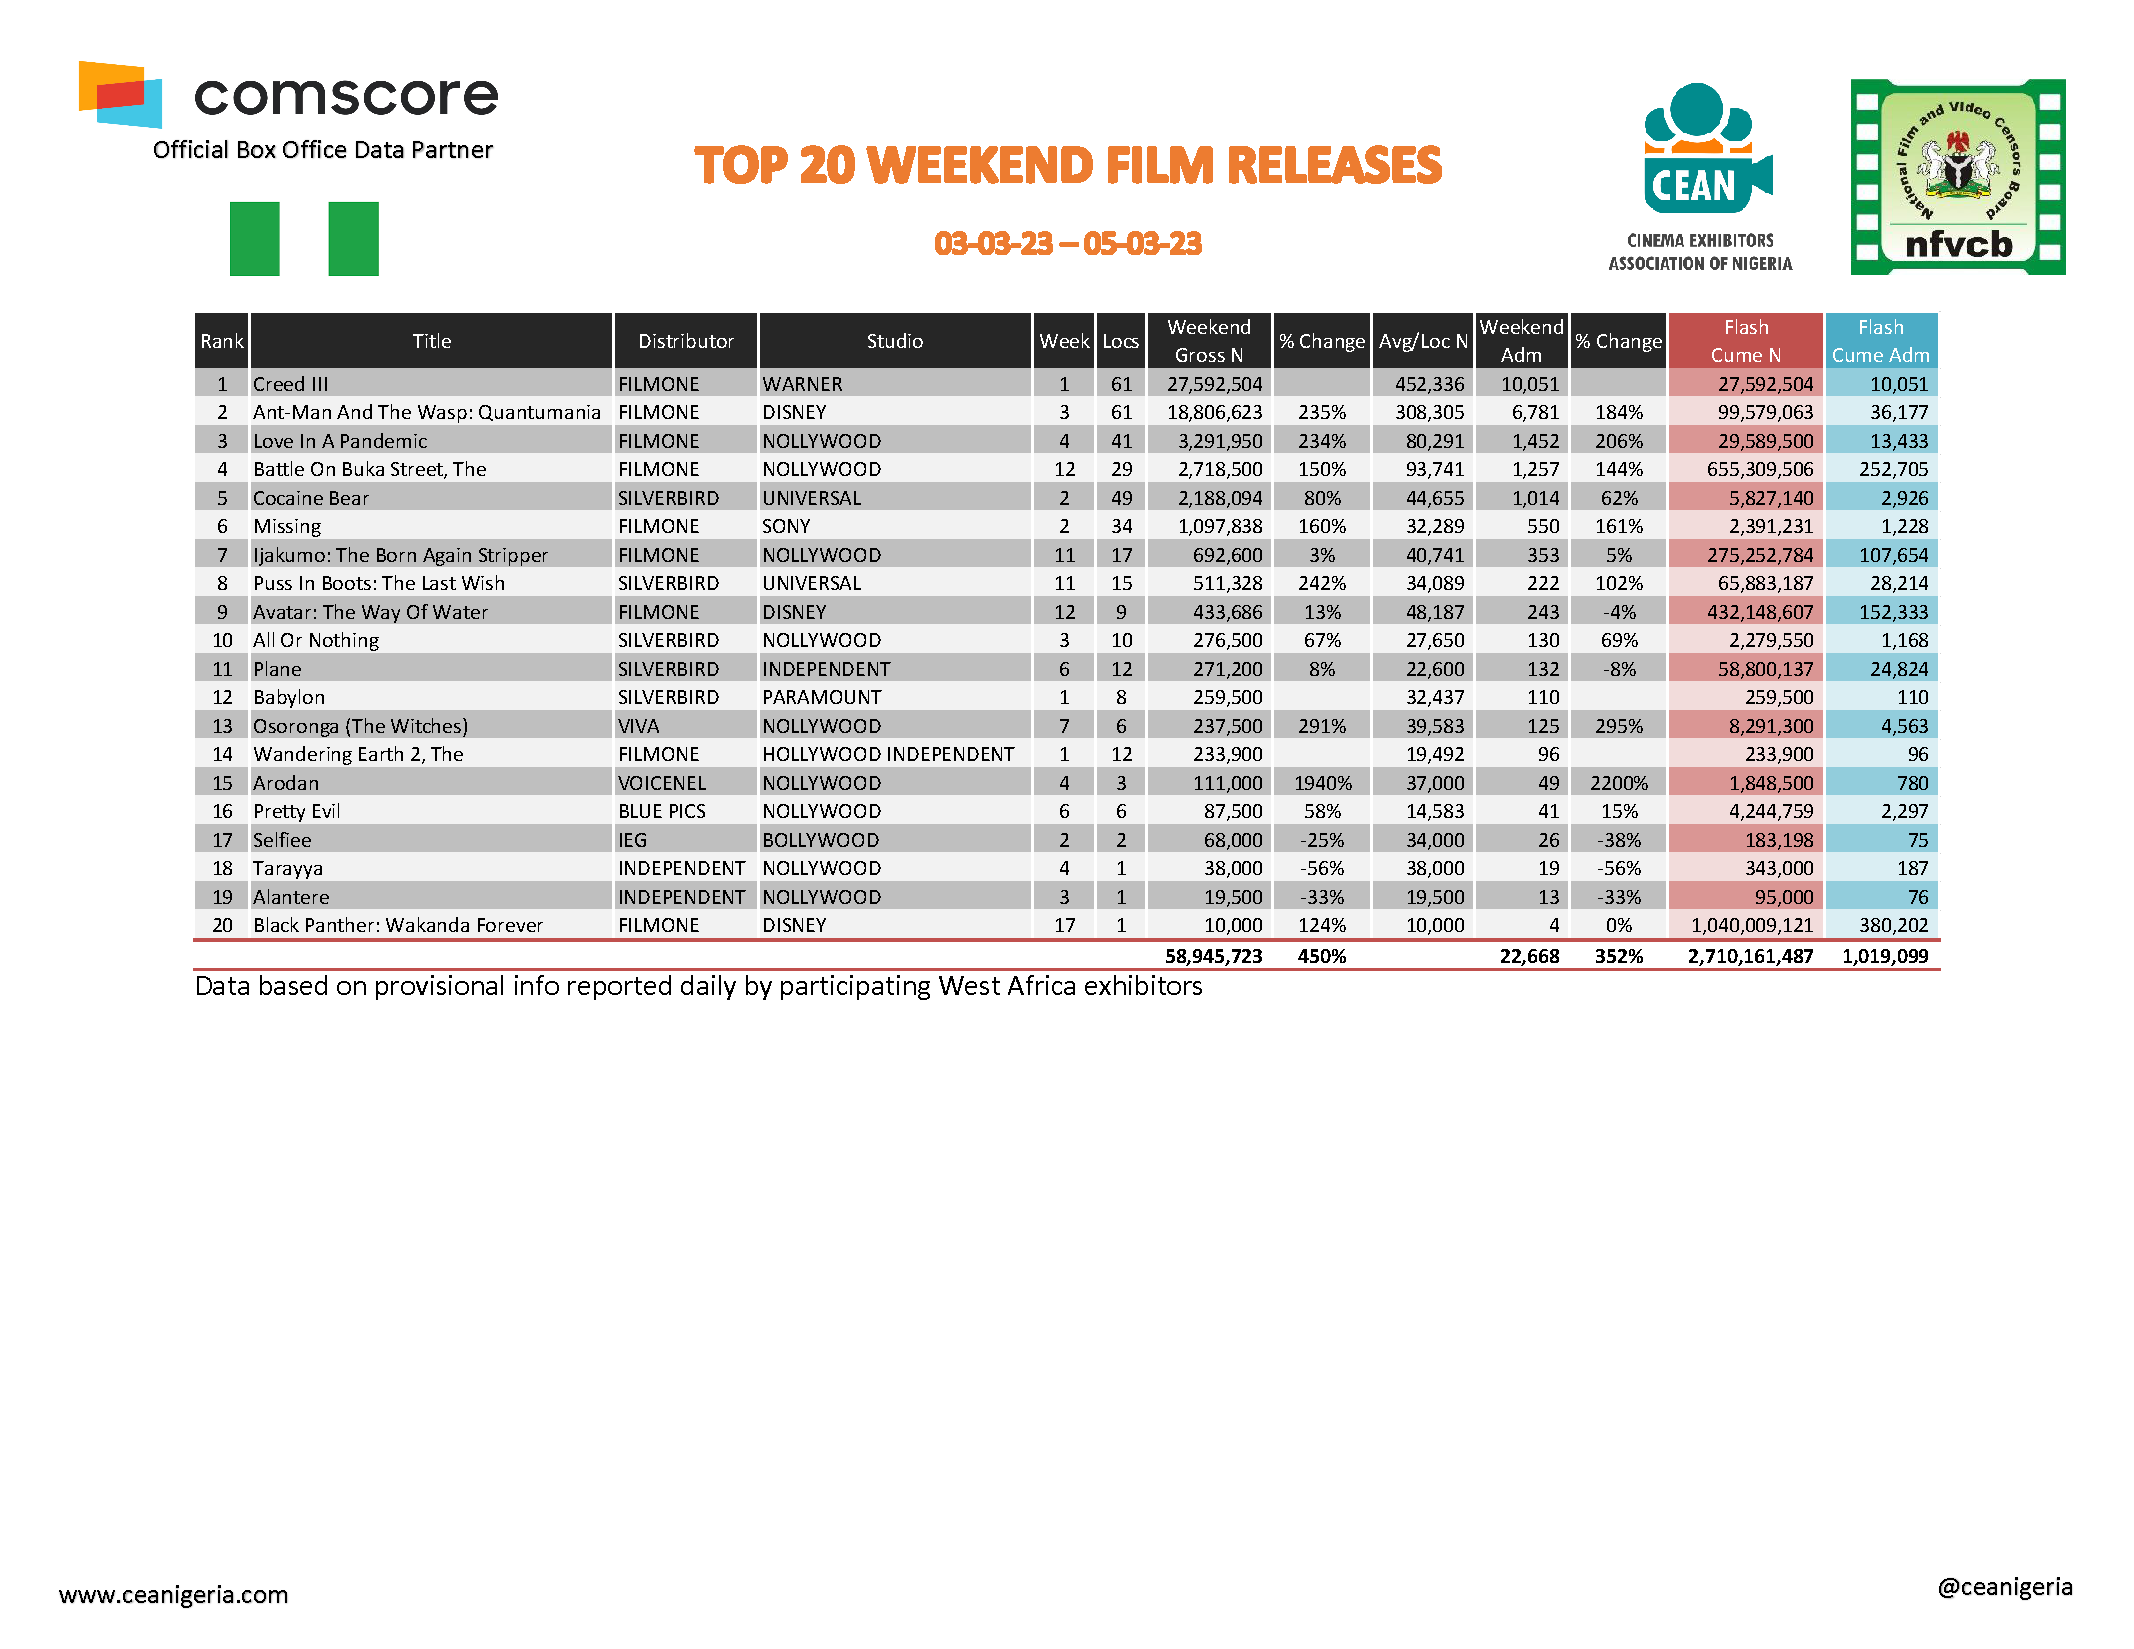 Top 20 films Weekend 3rd 5th March